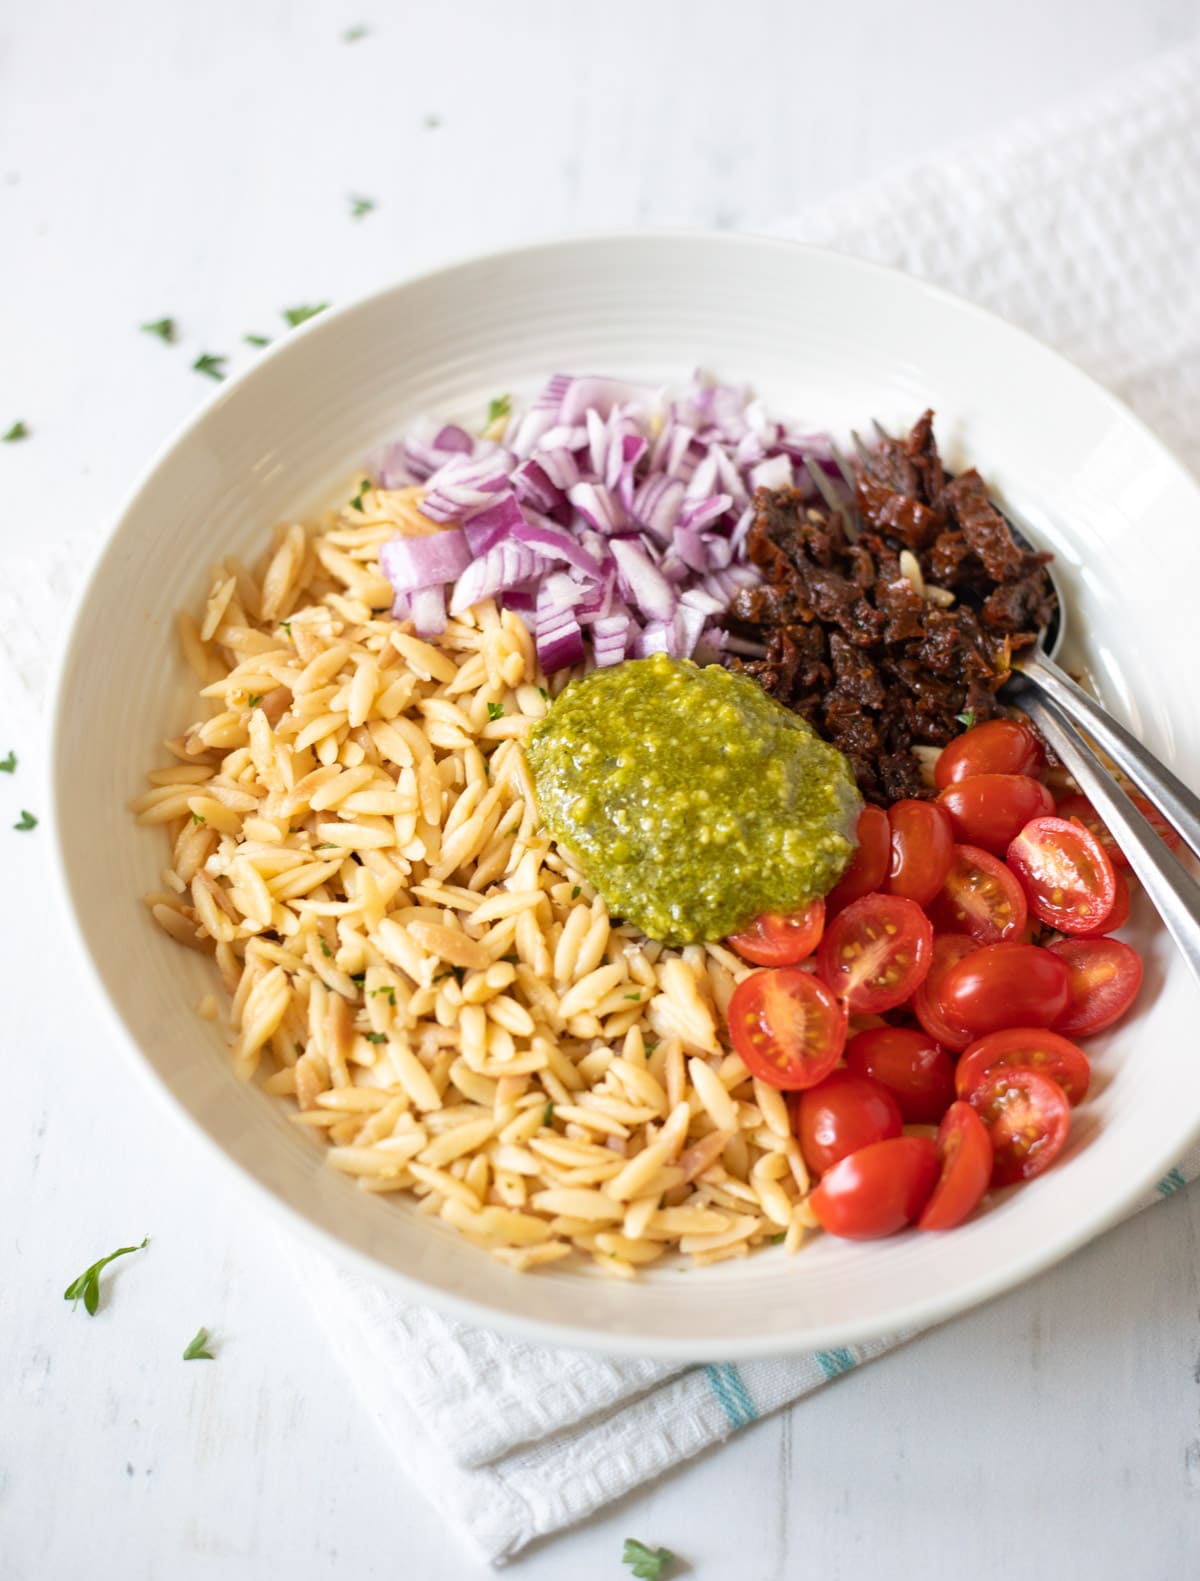 ingredients in a bowl to make salad such as orzo, tomatoes, onions and pesto